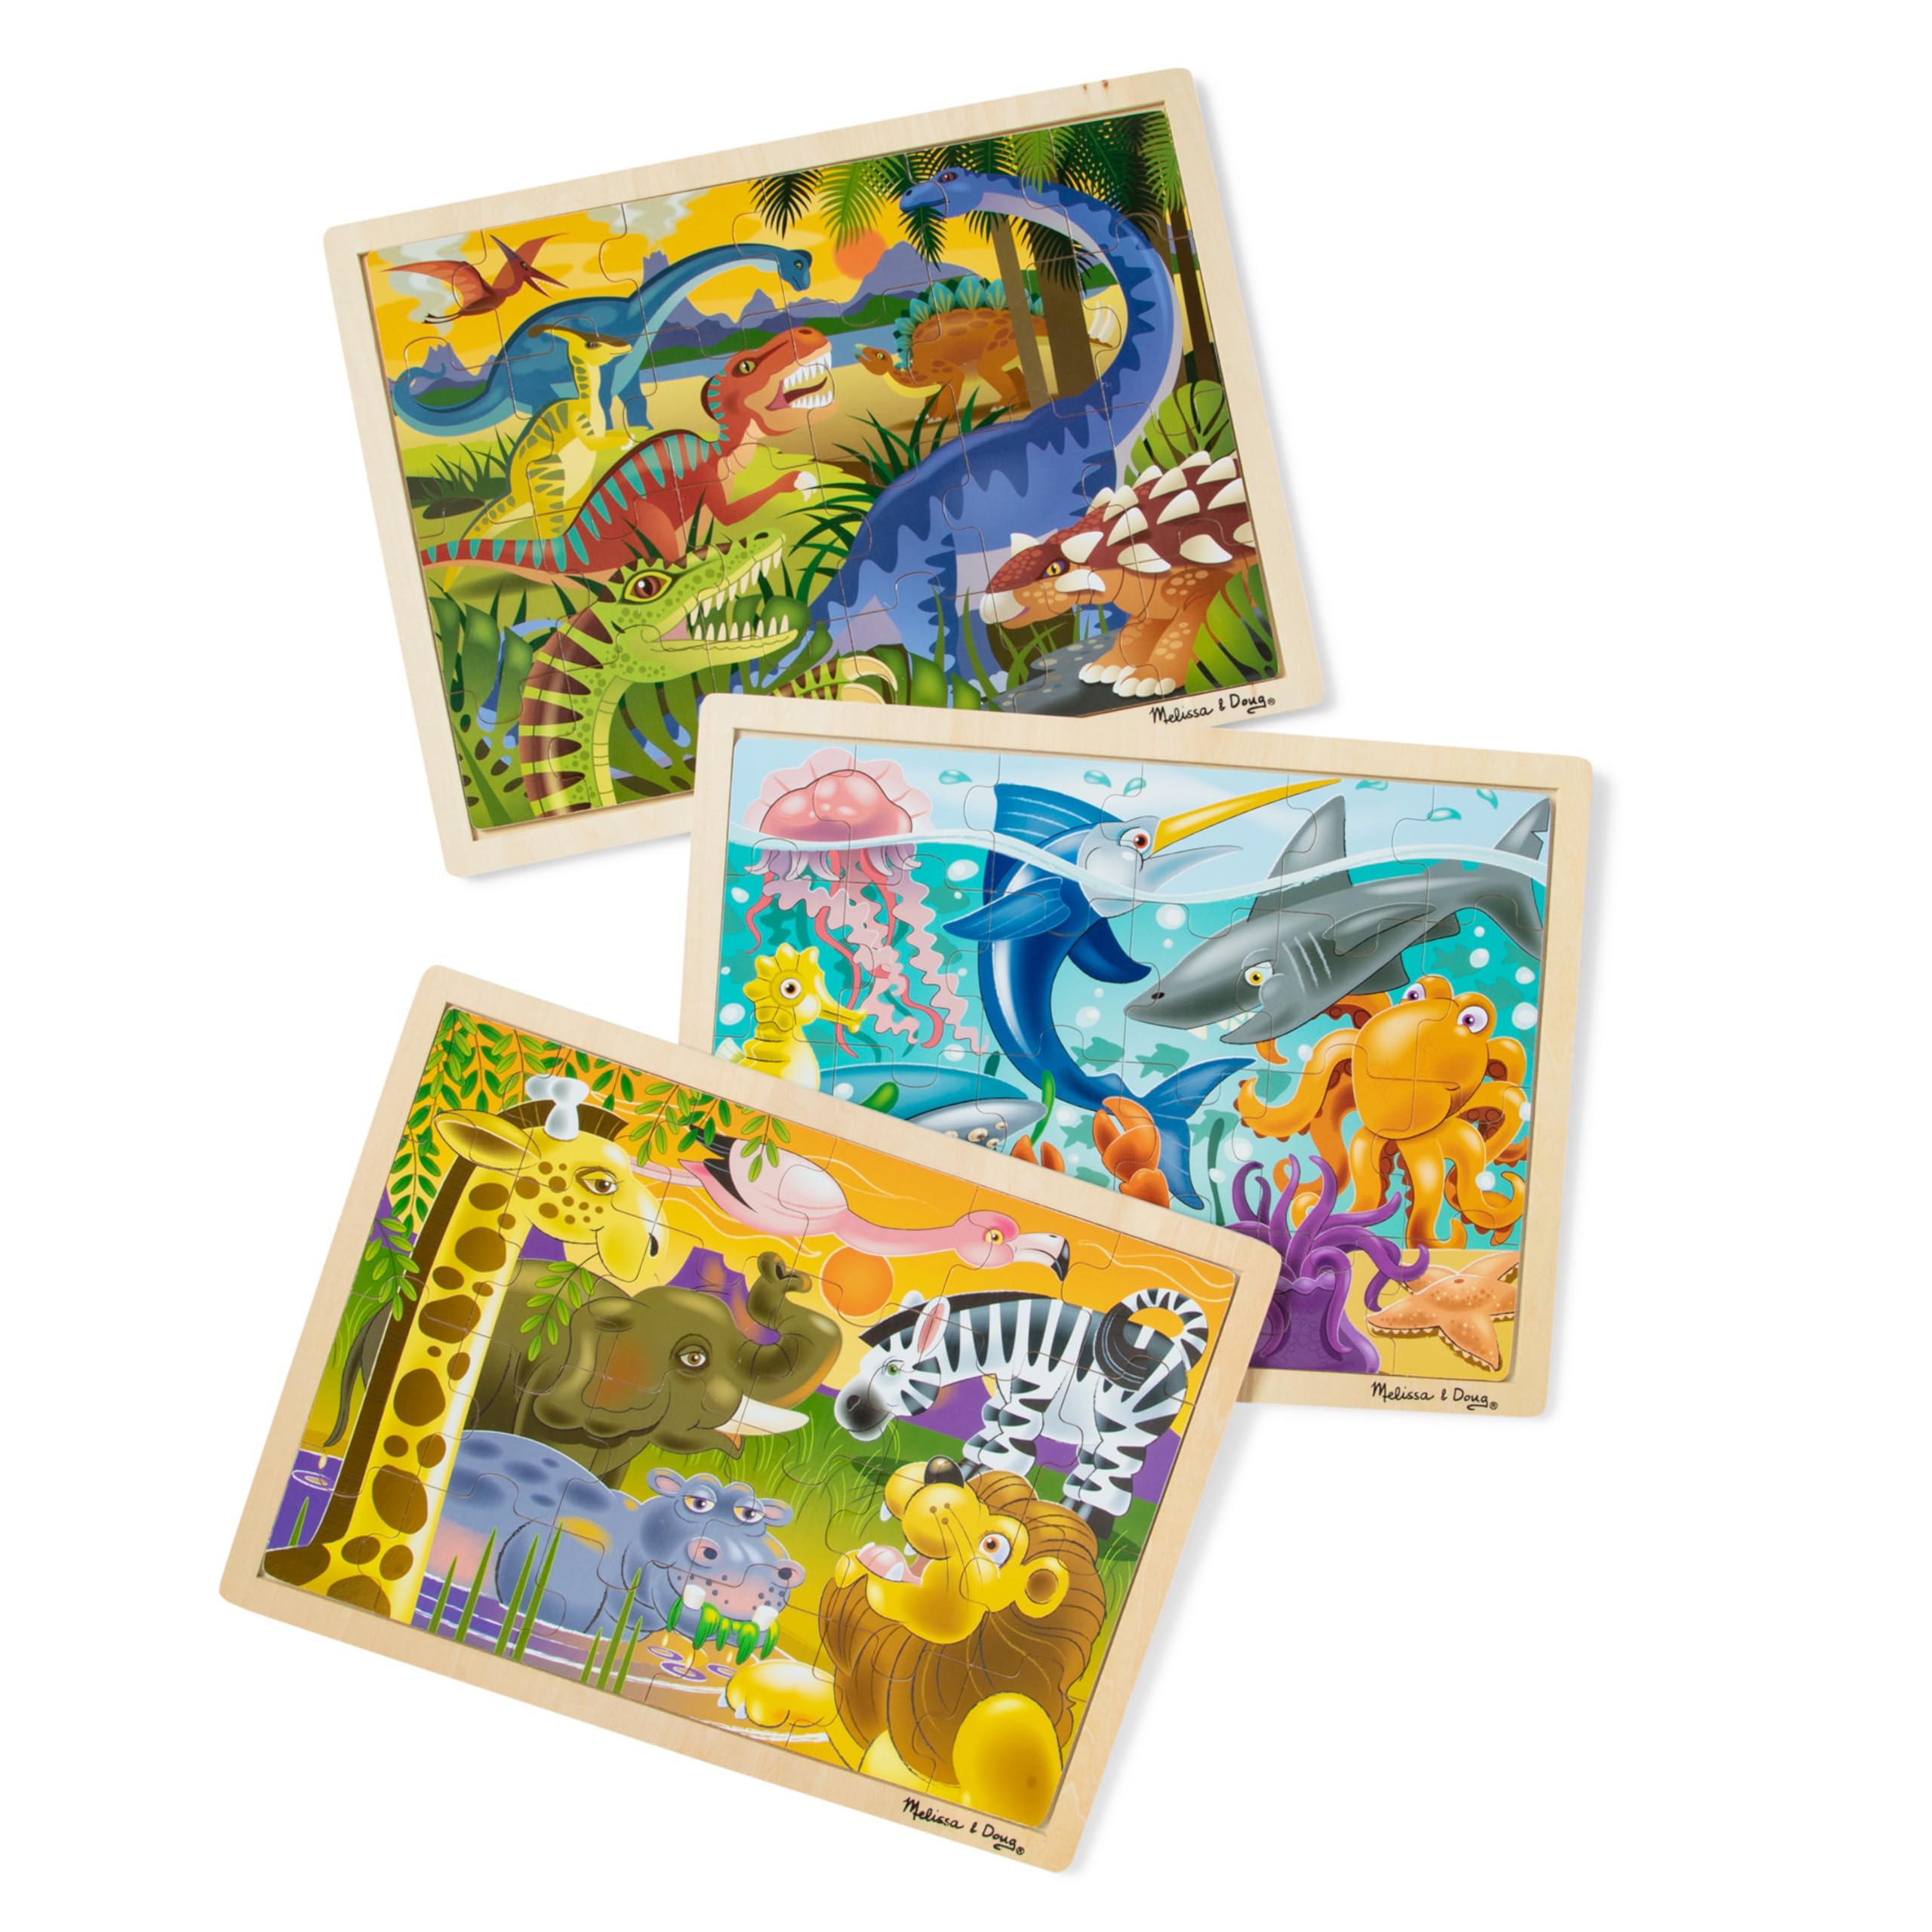 Melissa & Doug Jigsaw Puzzle Bundle (Dinosaur,Safari and Ocean) - Animal Puzzles, Wooden Jigsaw Puzzles For Kids Ages 3+